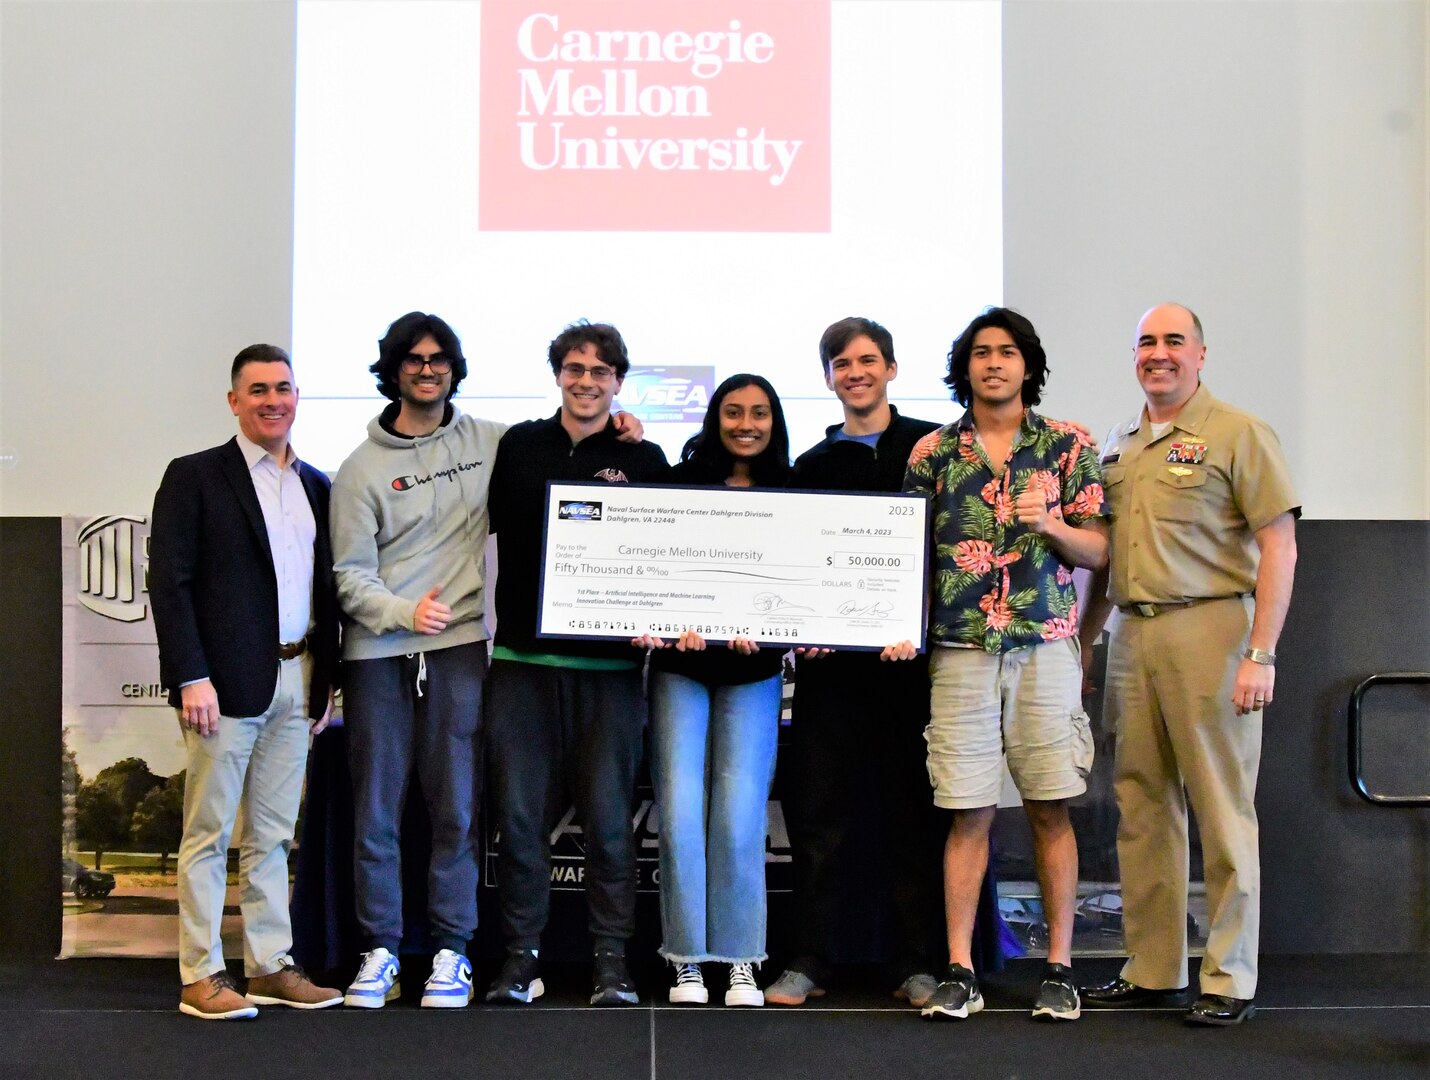 IMAGE: Carnegie Mellon University (CMU) took home first place honors during the Artificial Intelligence and Machine Learning Innovation Challenge at Dahlgren, March 2. The students were awarded a $50,000 cash prize for their efforts. Pictured from left to right: NSWCDD Technical Director Dale Sisson, SES, CMU team members Lucas Darcy, Austin Weltz, Medha Palavalli, Matthew Garcia, Pranav Rajbhandari and NSWCDD Commanding Officer, Capt. Philip Mlynarski.